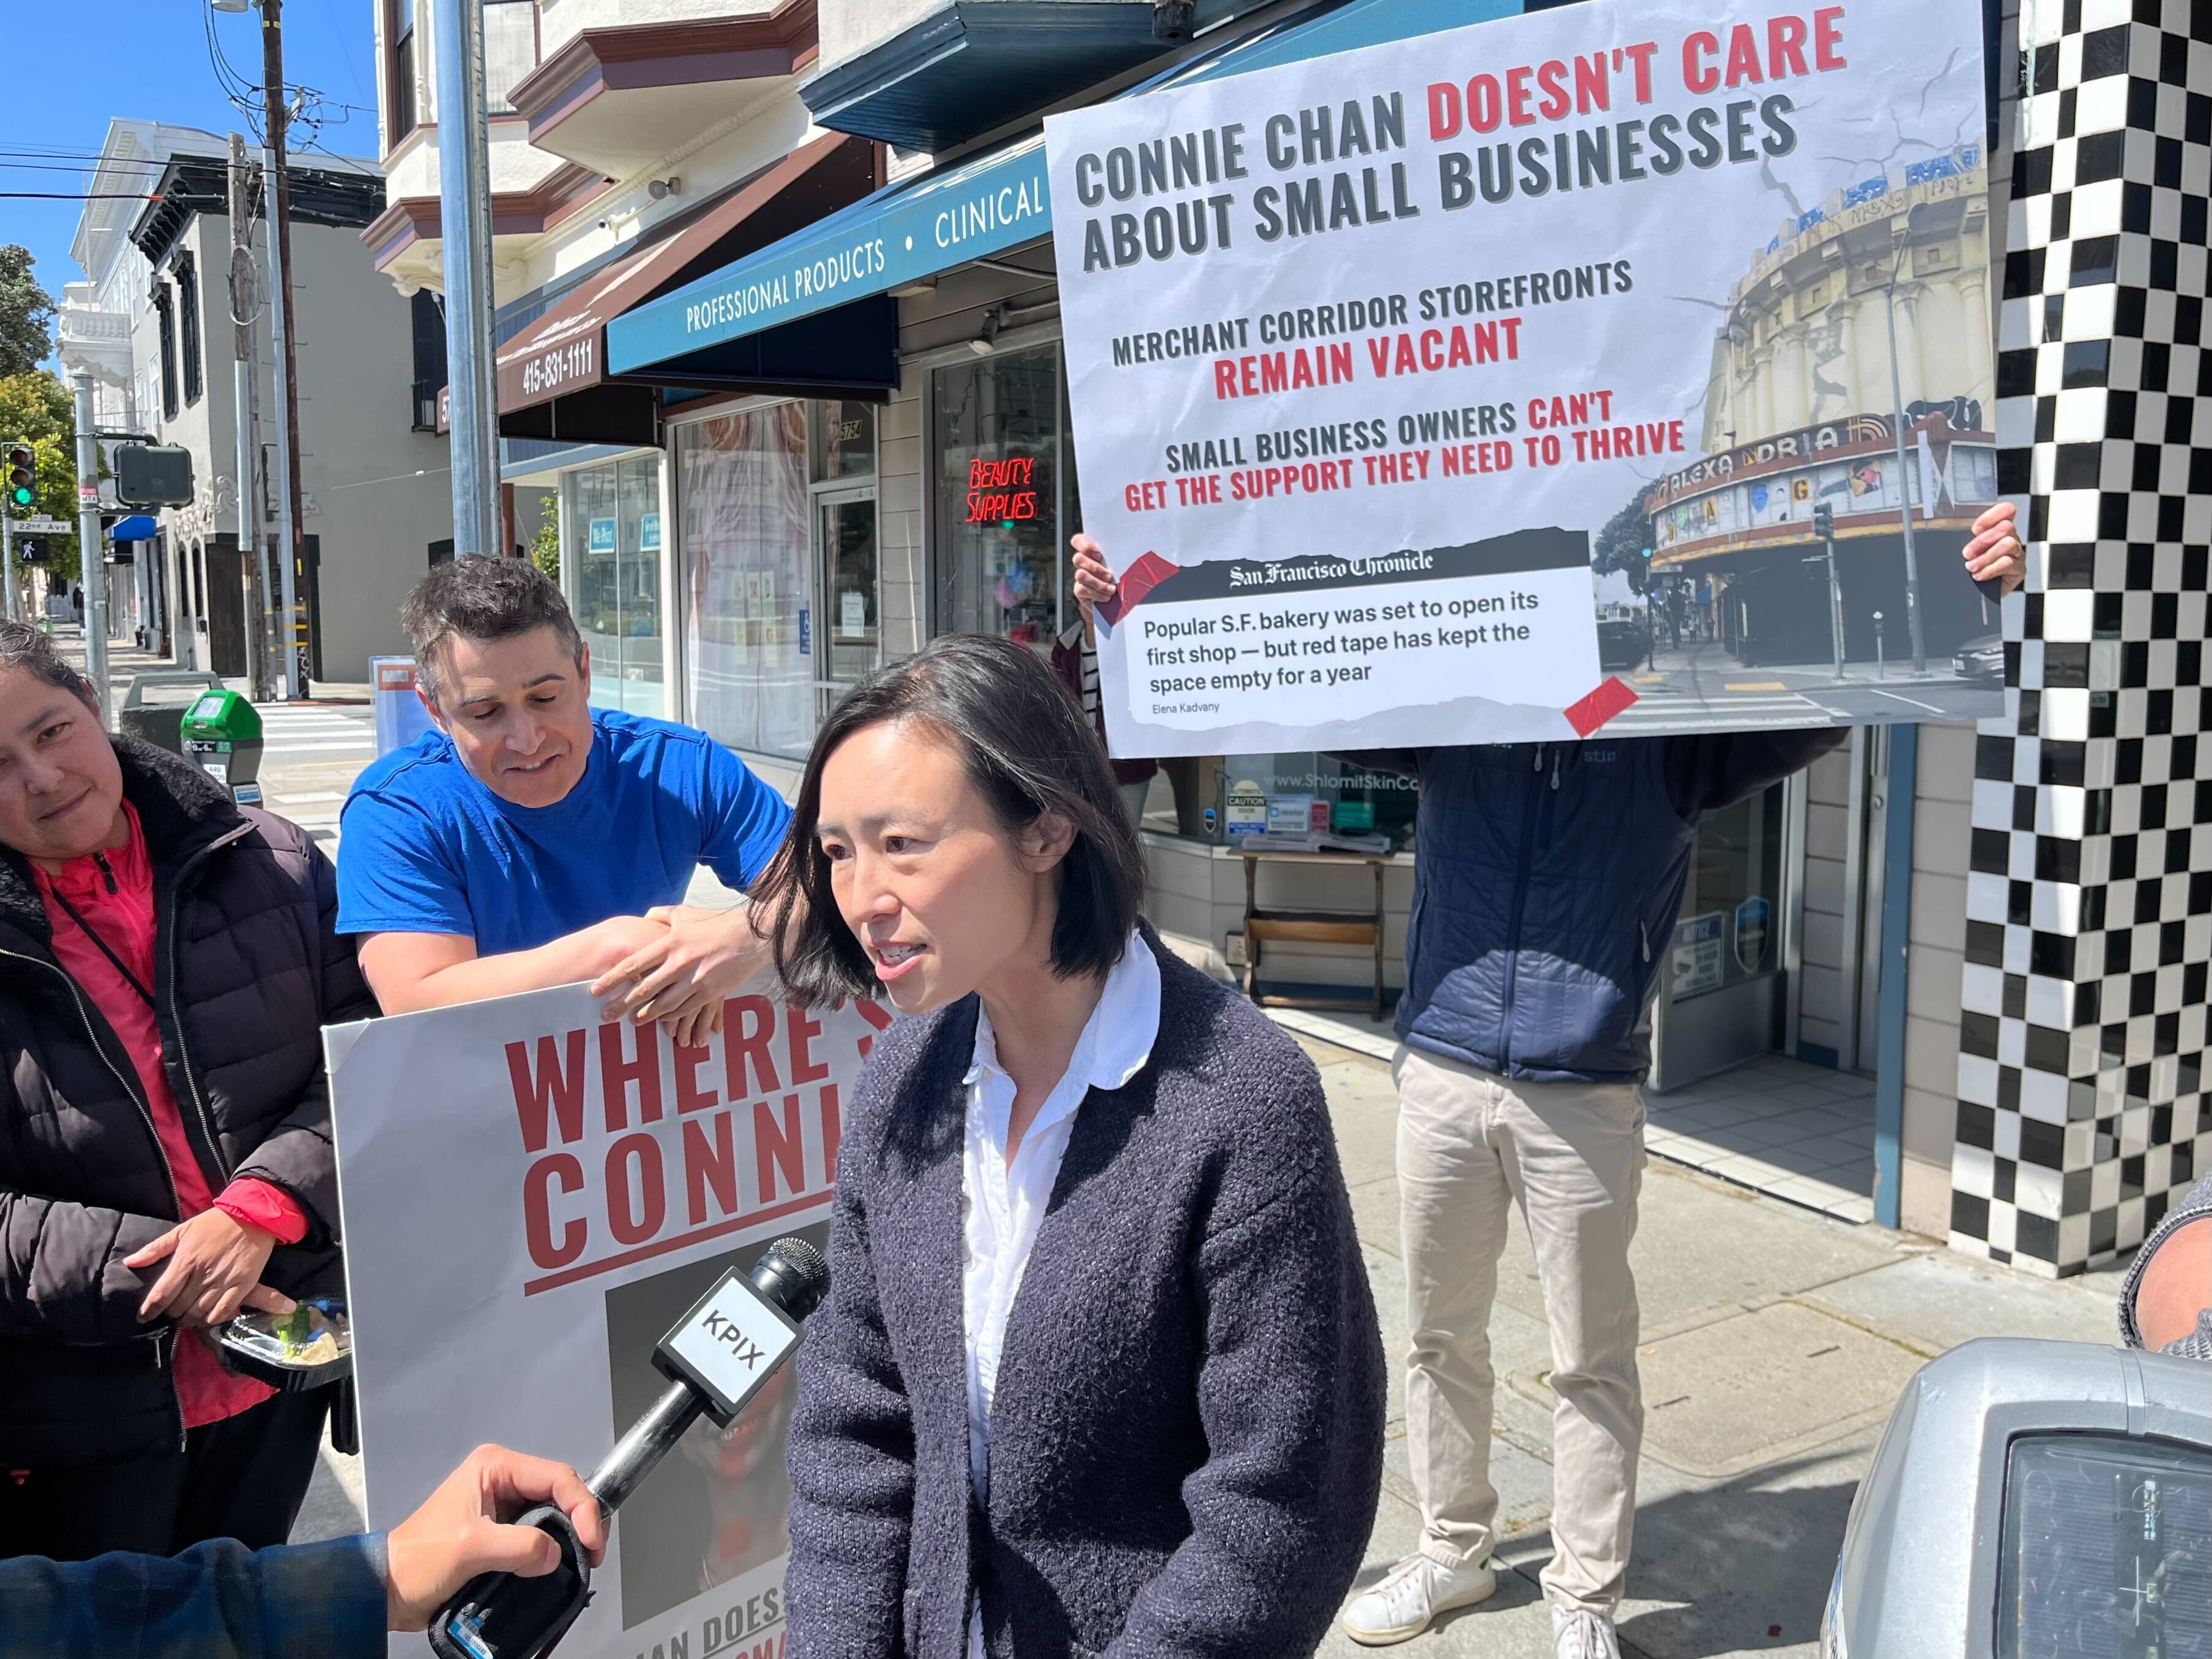 A person is being interviewed on a sunny street, holding a sign about local business concerns, with others holding a larger banner.